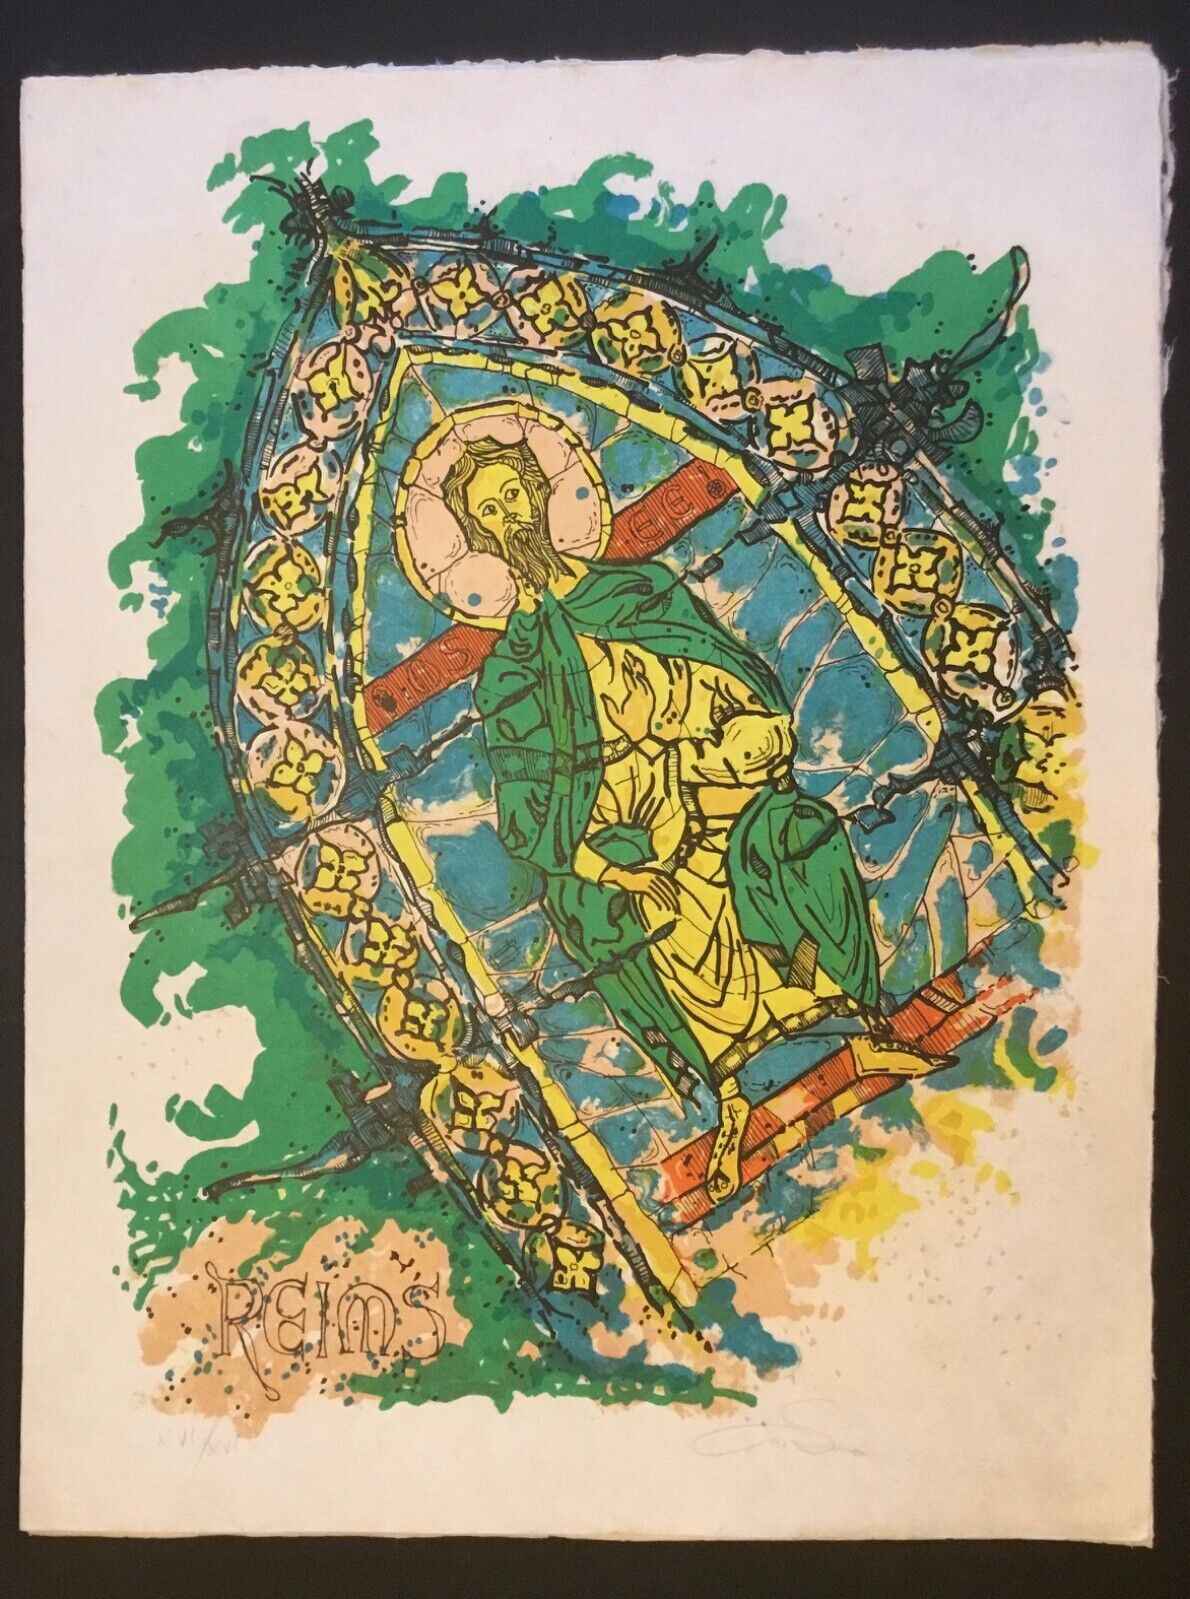 Catholic Art - Christ - Reims Cathedral - Original Serigraph - Signed / Numbered